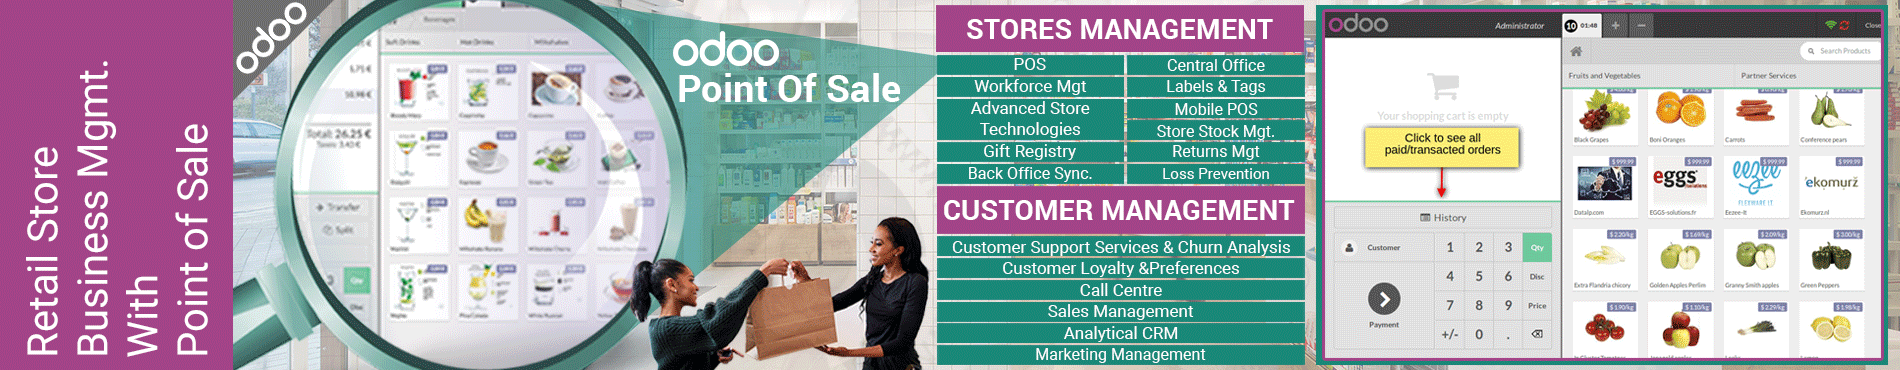 odoo for Retail store